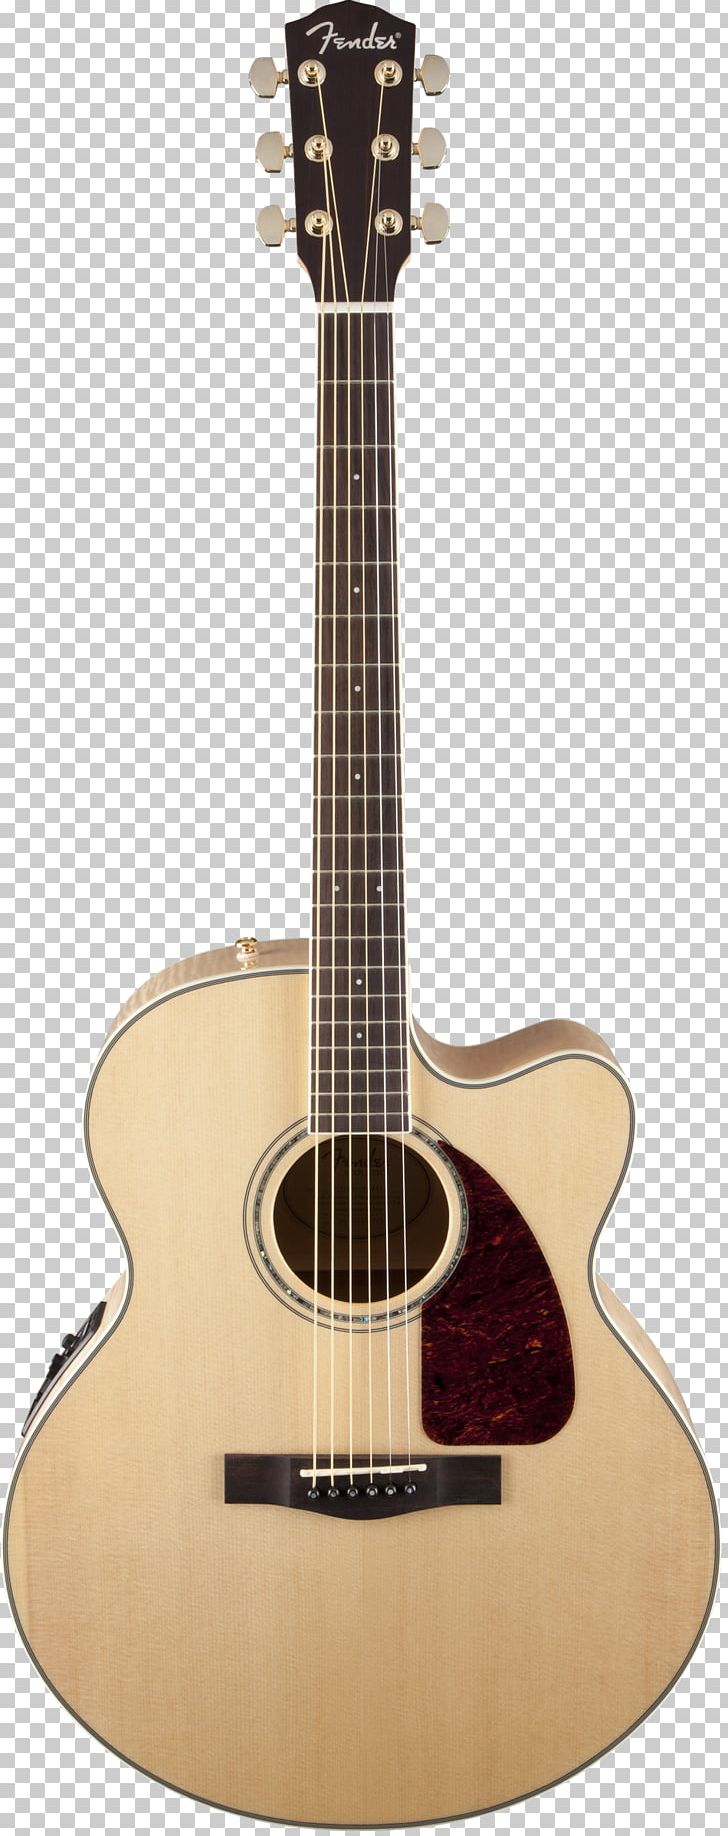 Steel-string Acoustic Guitar String Instruments Acoustic-electric Guitar PNG, Clipart, Acoustic Electric Guitar, Classical Guitar, Cuatro, Guitar Accessory, Music Free PNG Download